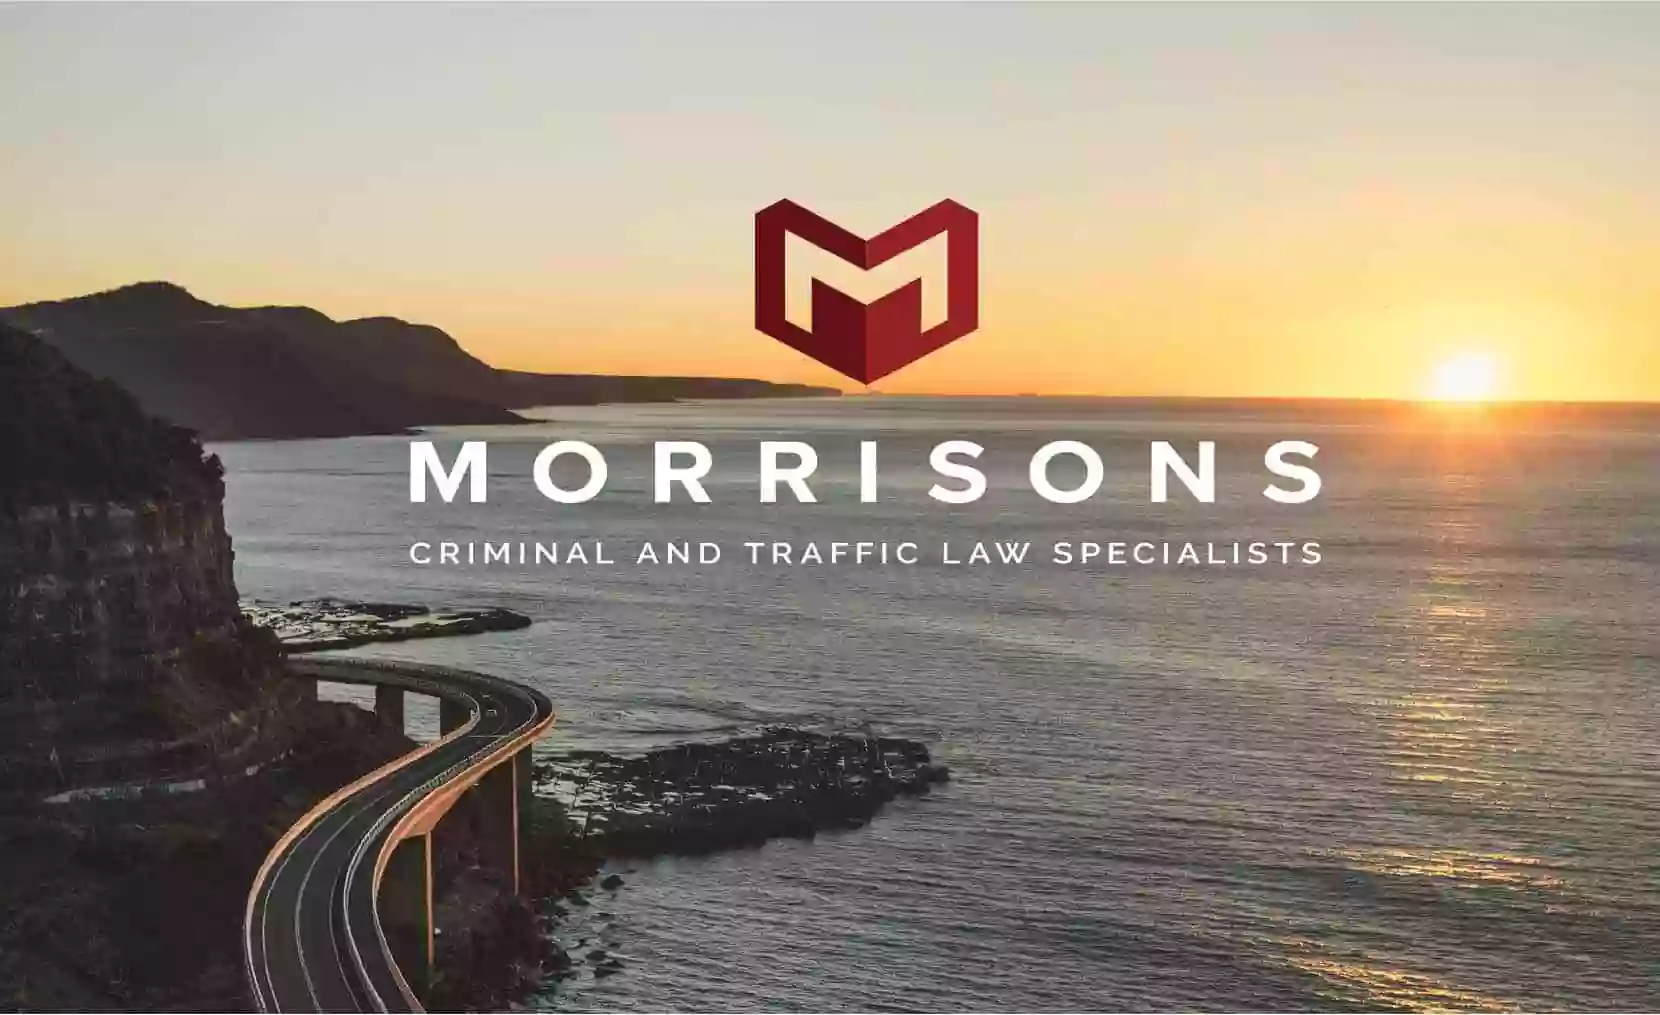 Morrisons - Criminal and Traffic Law Specialists